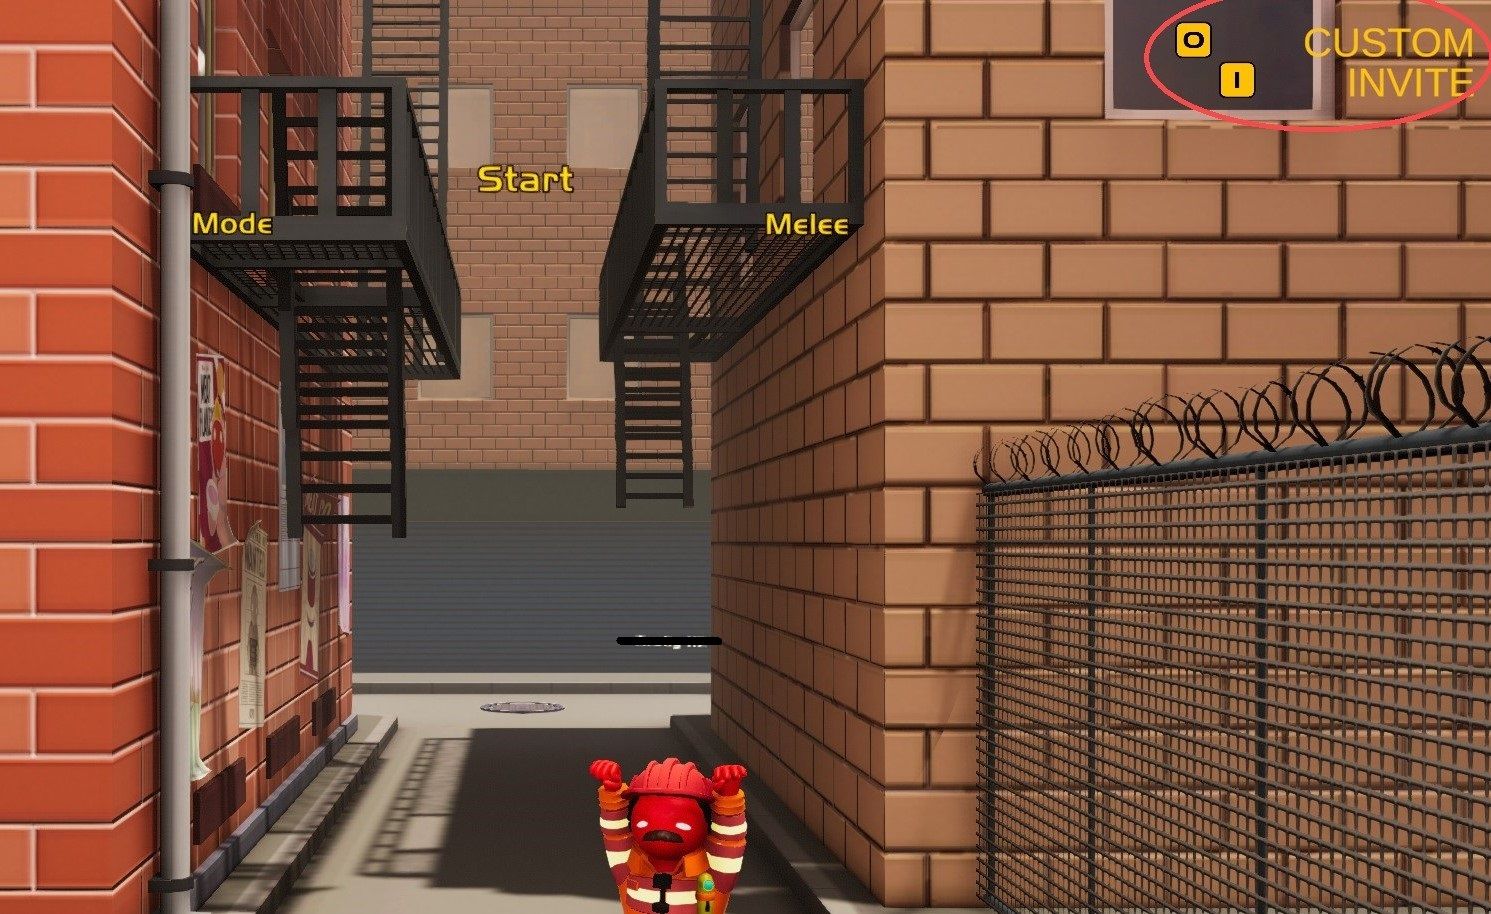 How To sett Up a private match in Gang Beasts